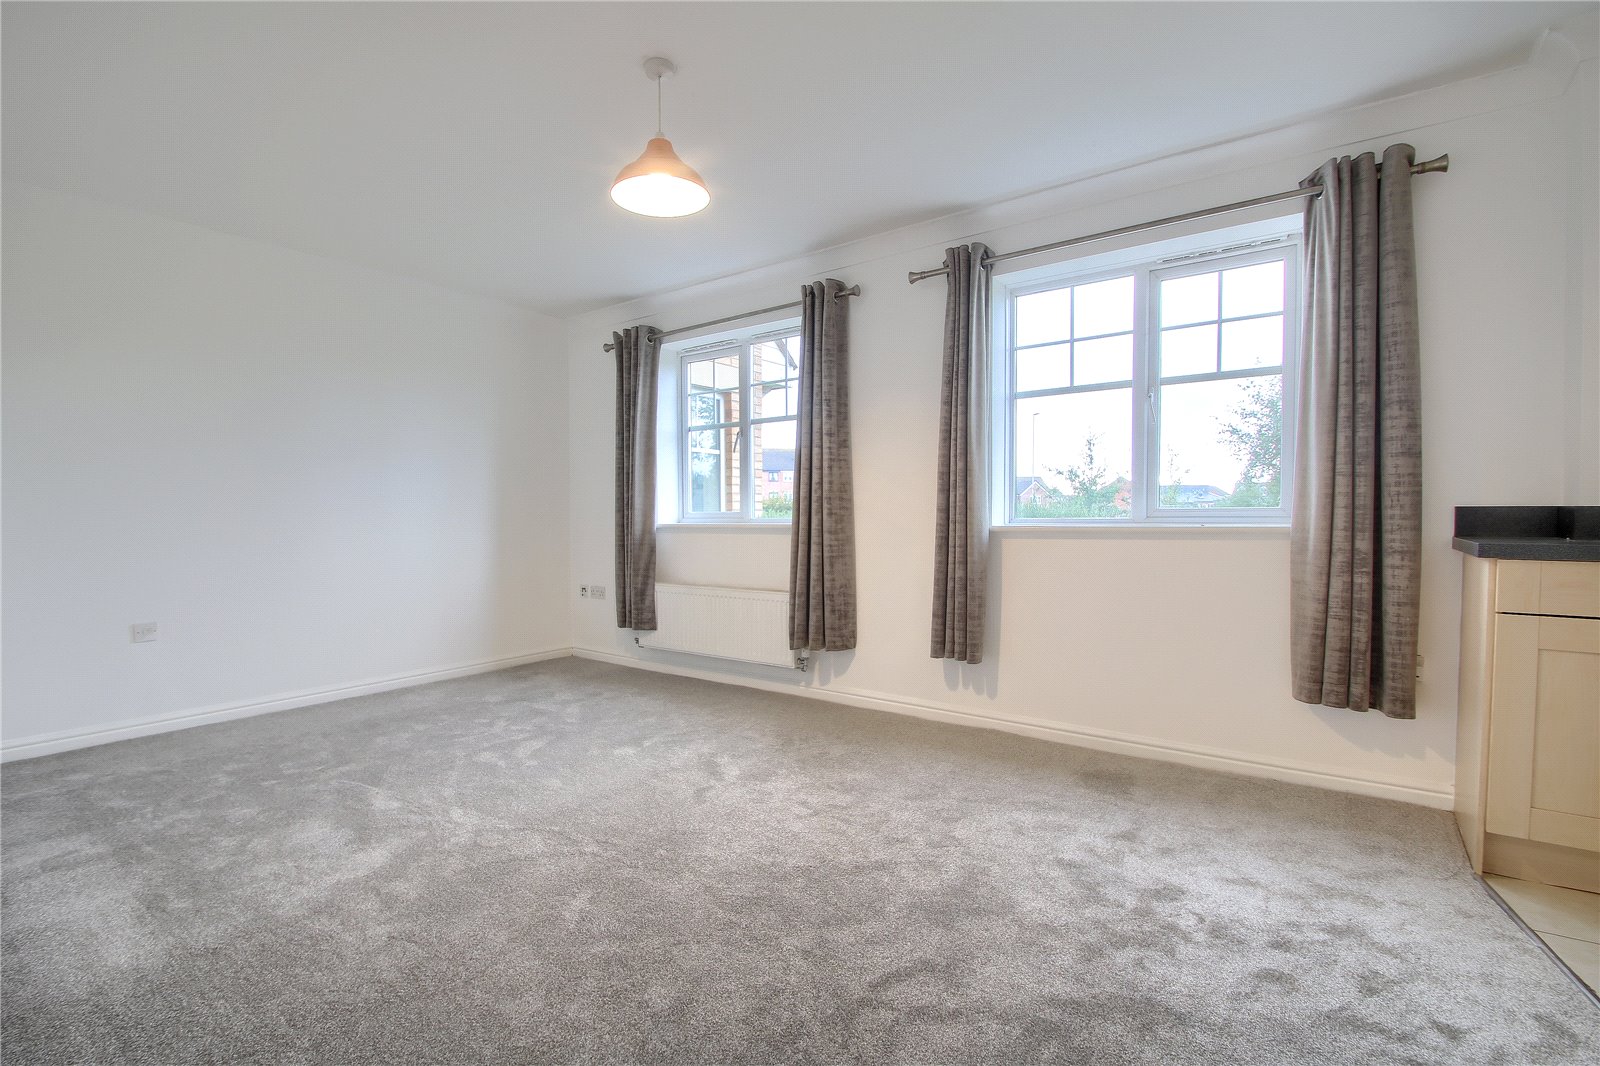 2 bed apartment for sale in Longleat Walk, Ingleby Barwick  - Property Image 3